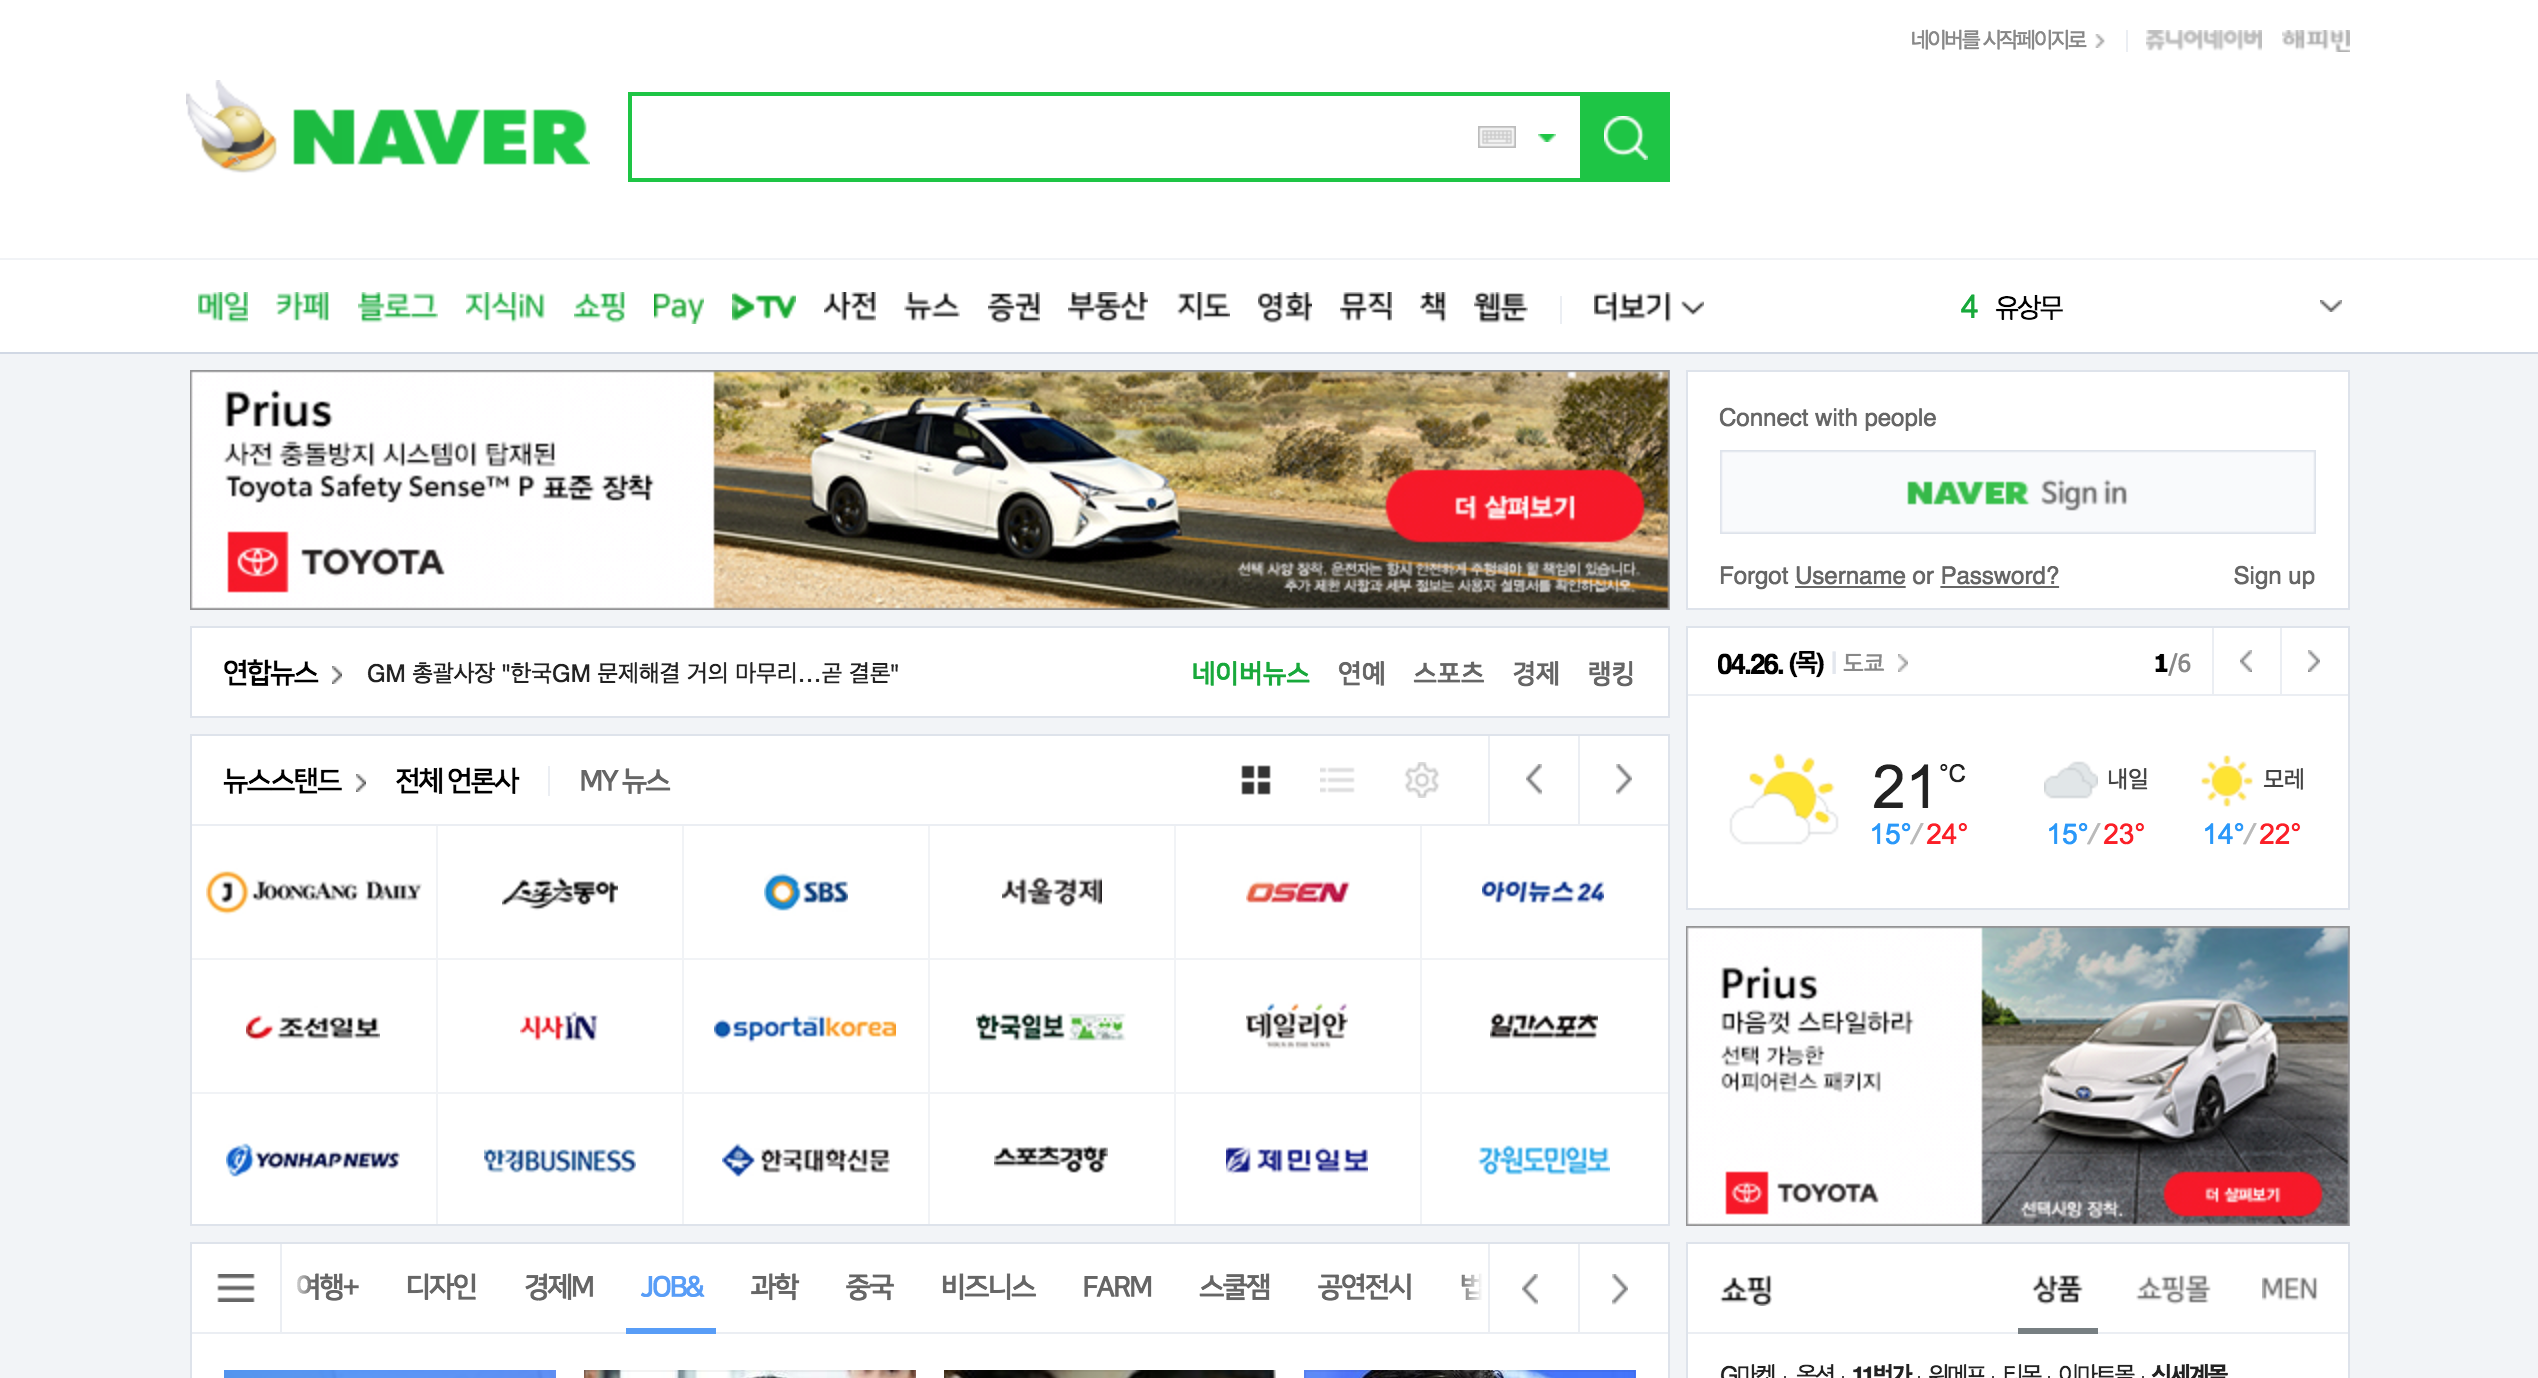 an image of the Naver search screen